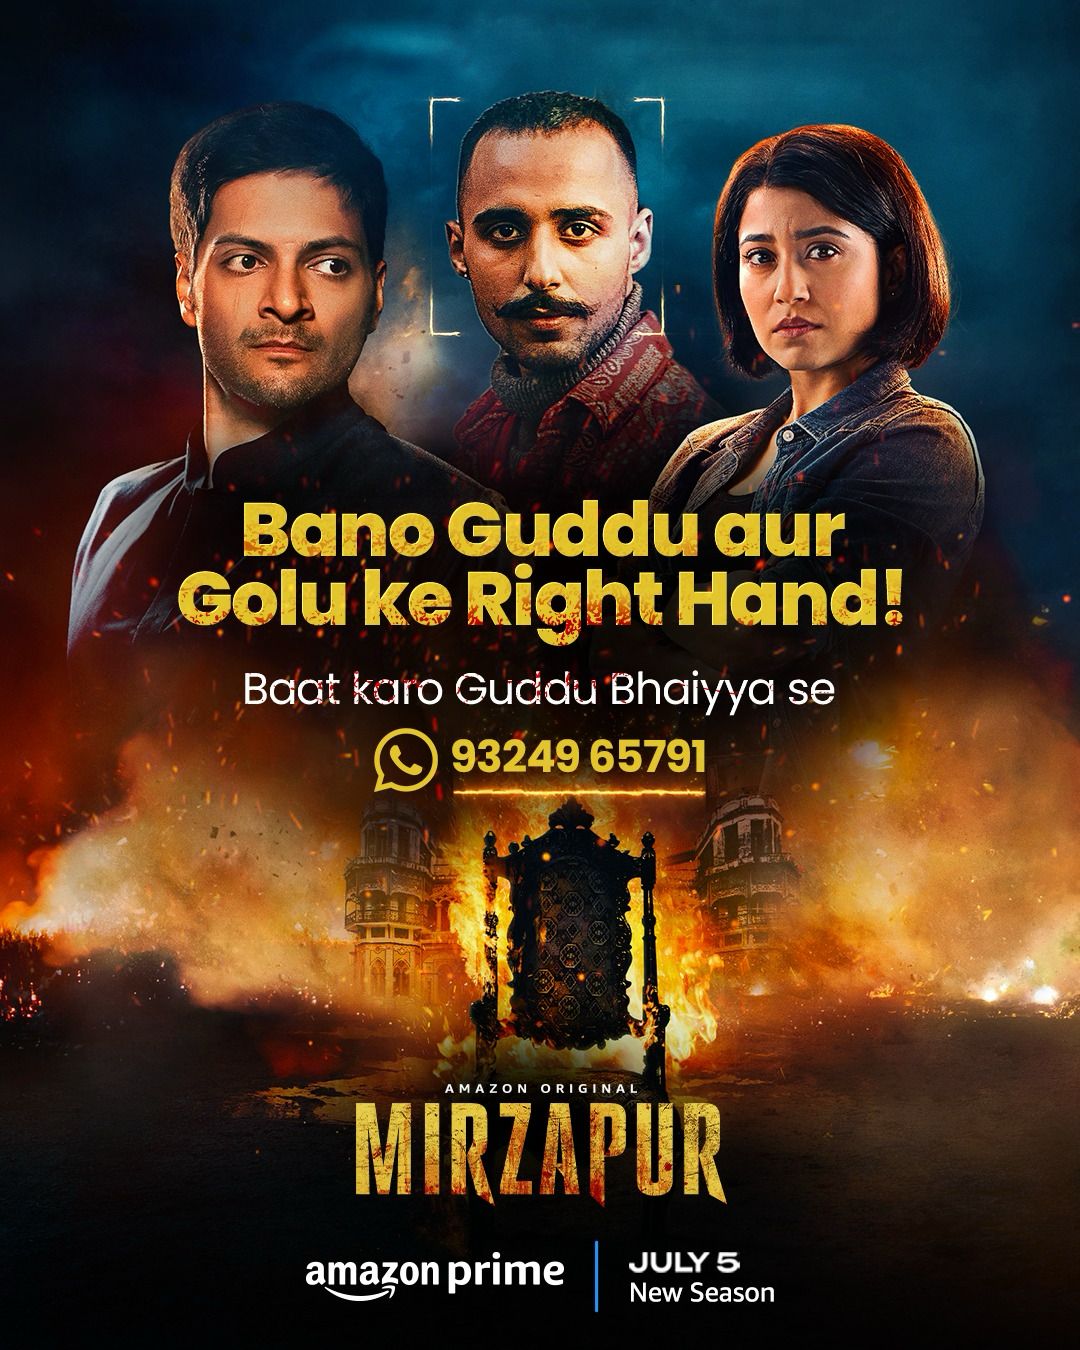 Prime Video's Mirzapur S3 Campaign Attracts 50k Users in 24 Hours